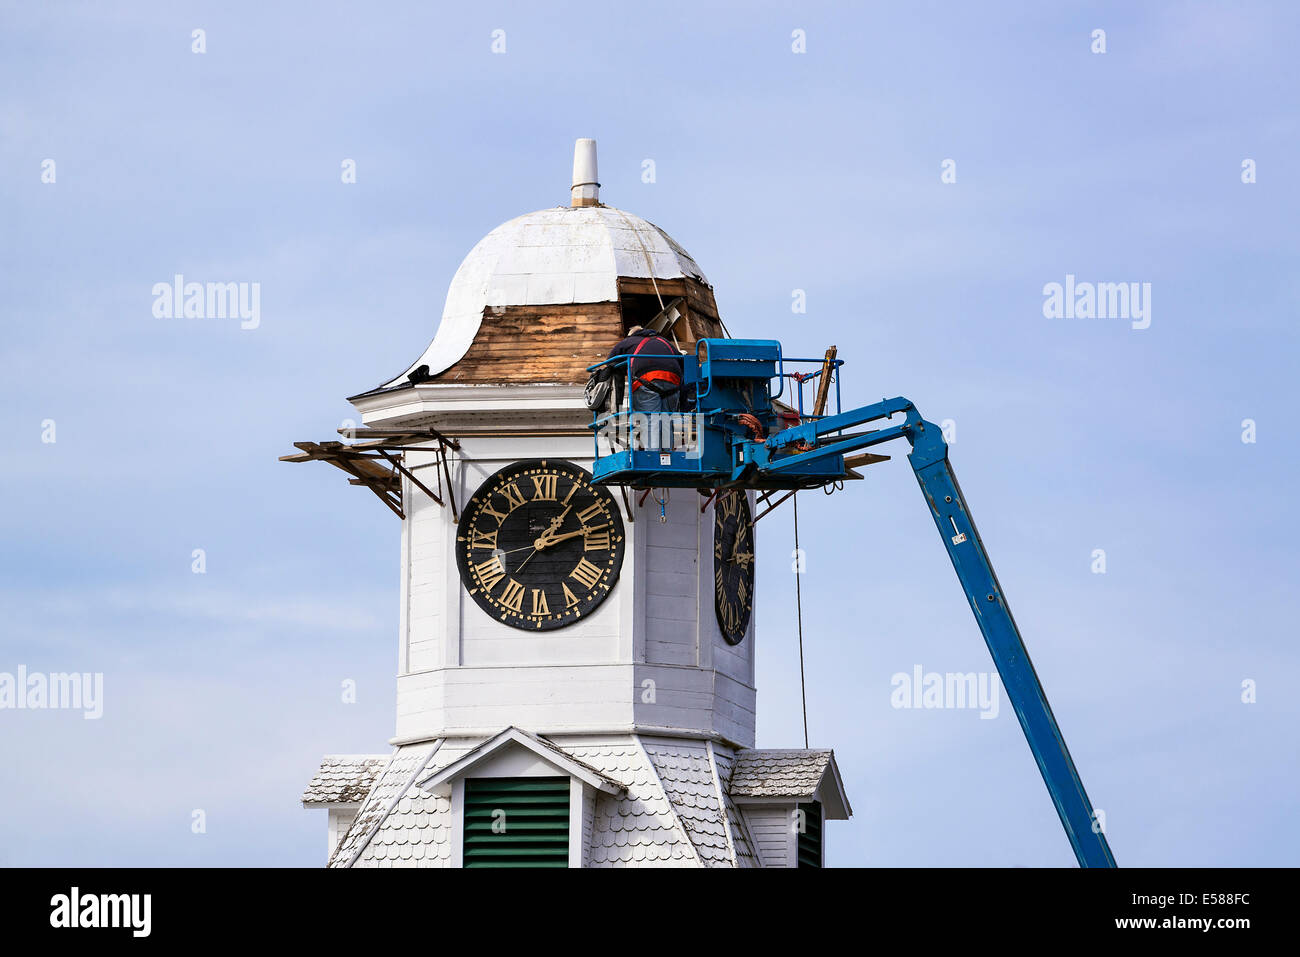 Men on a cherry picker repair the restore the roof of the town clock tower, Weston, Vermont, USA Stock Photo